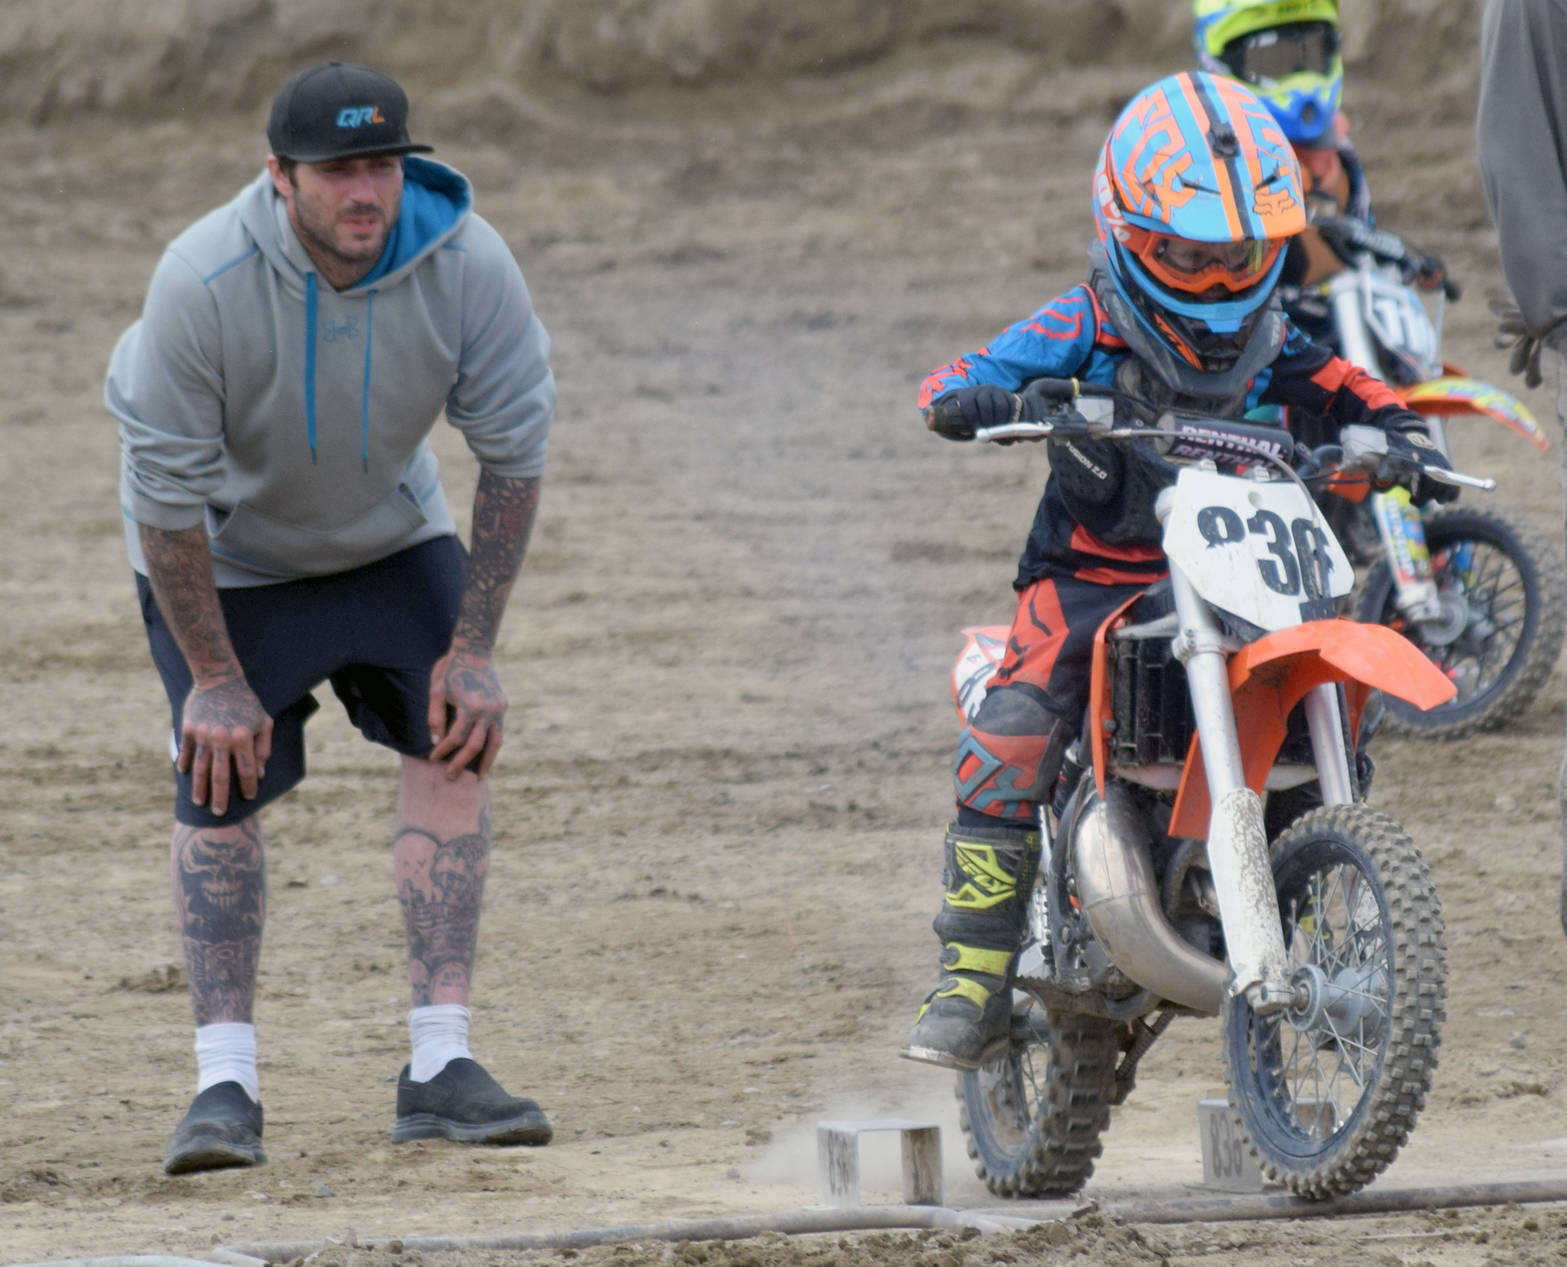 Shane Mullican, of Soldotna, watches as his son, Draiden roars off the starting line in the 65cc Novice race Sunday, June 17, 2018, at the Alaska State Motocross Championships at Twin City Raceway. (Photo by Jeff Helminiak/Peninsula Clarion)